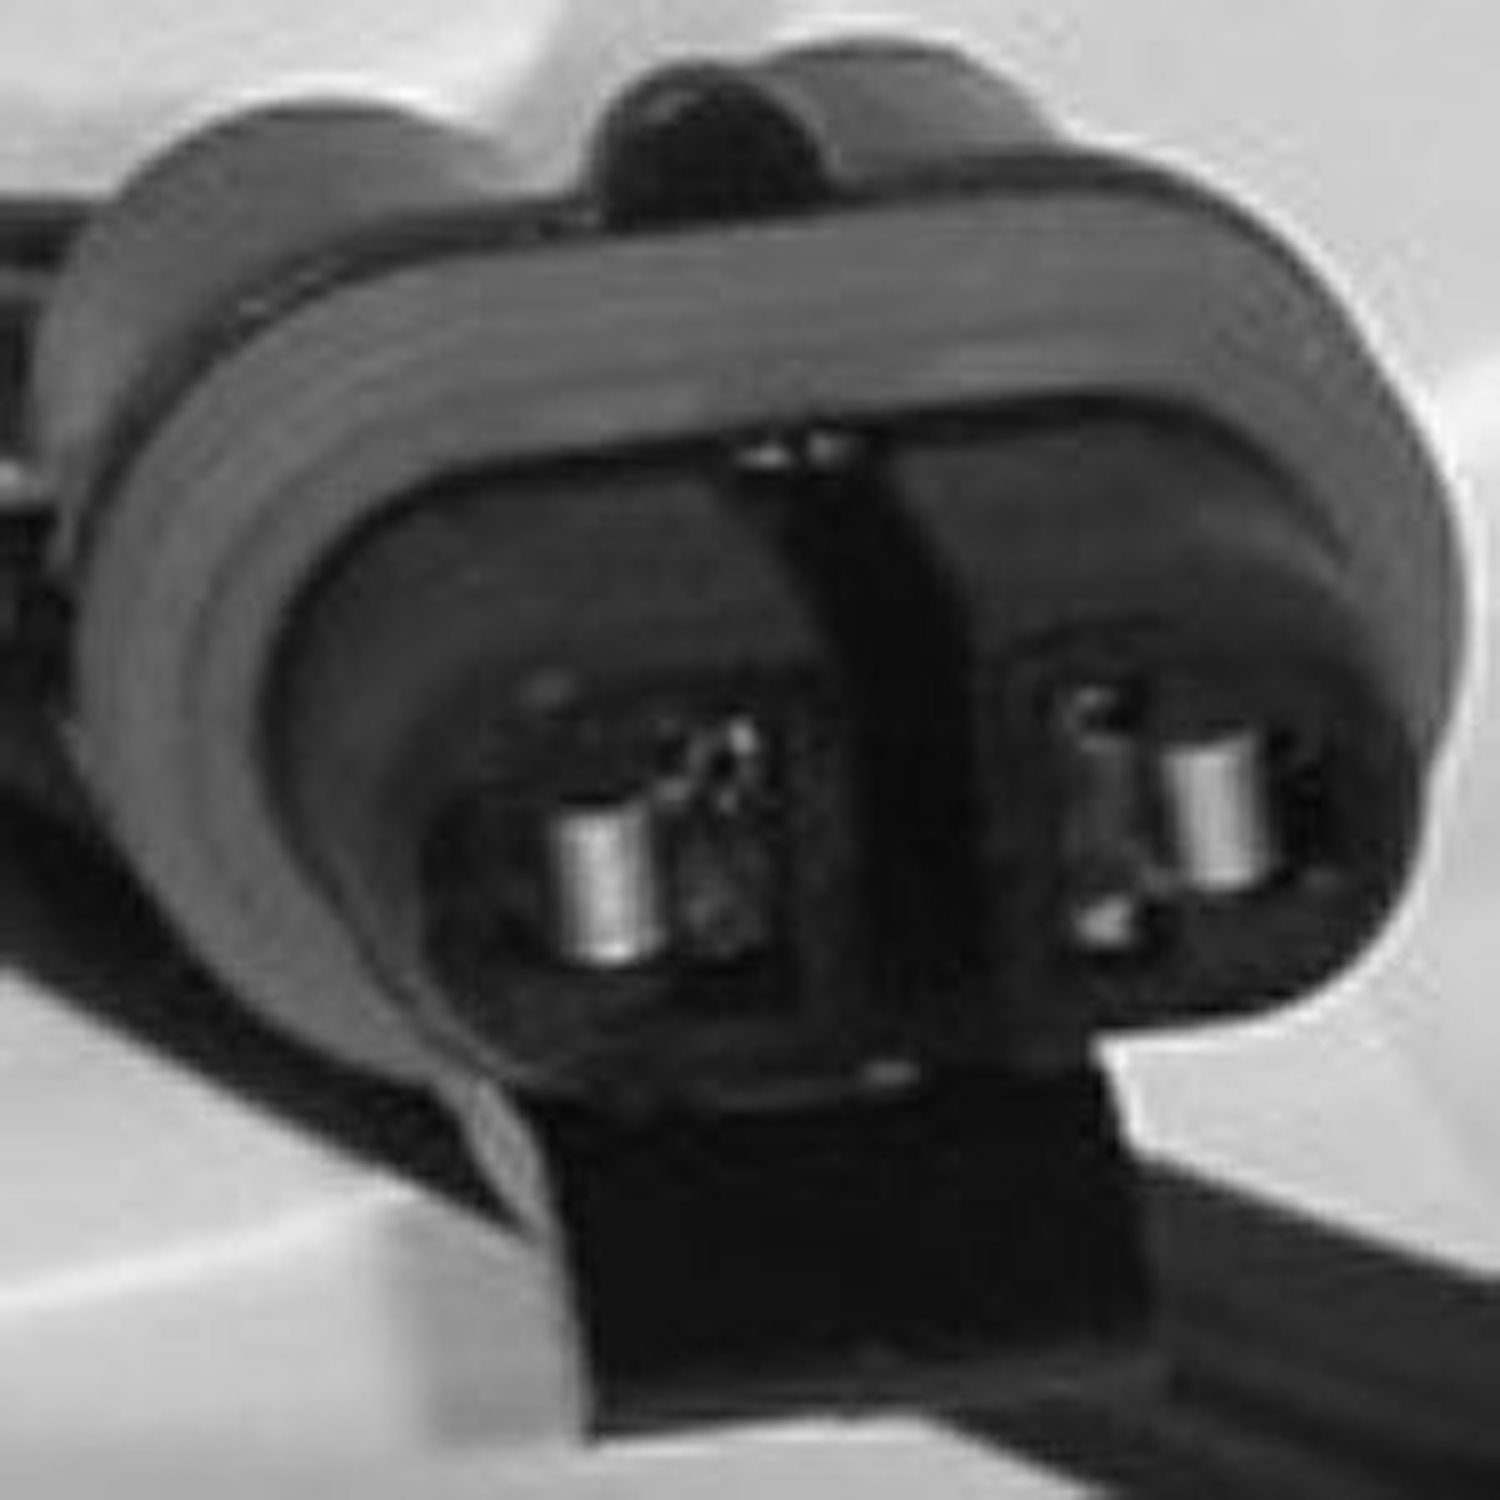 Pigtail Connector